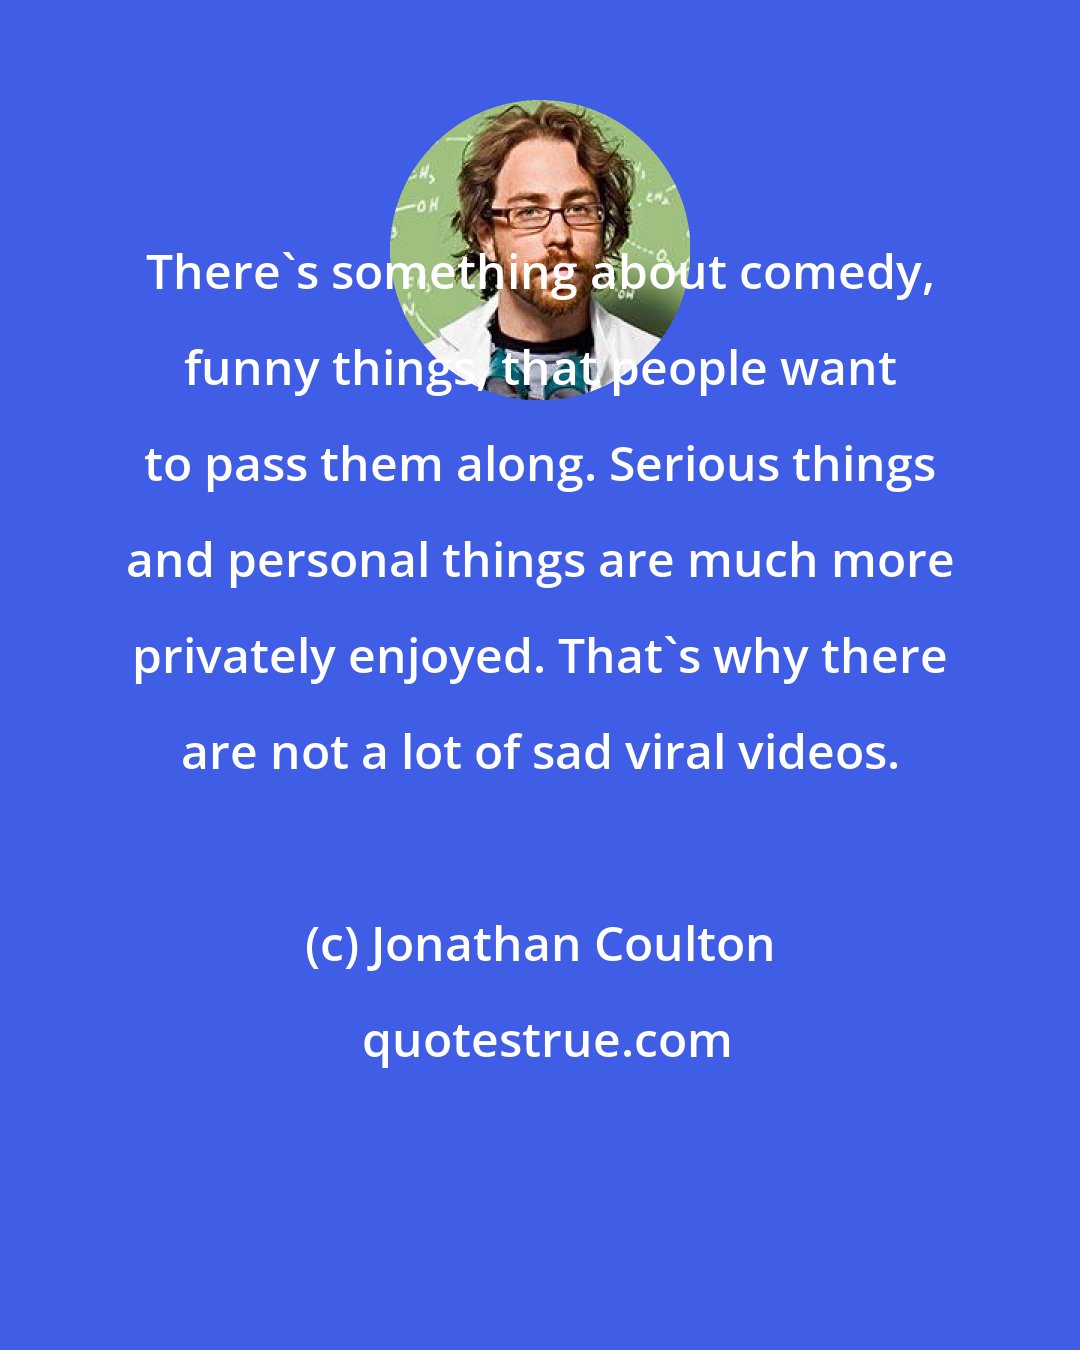 Jonathan Coulton: There's something about comedy, funny things, that people want to pass them along. Serious things and personal things are much more privately enjoyed. That's why there are not a lot of sad viral videos.